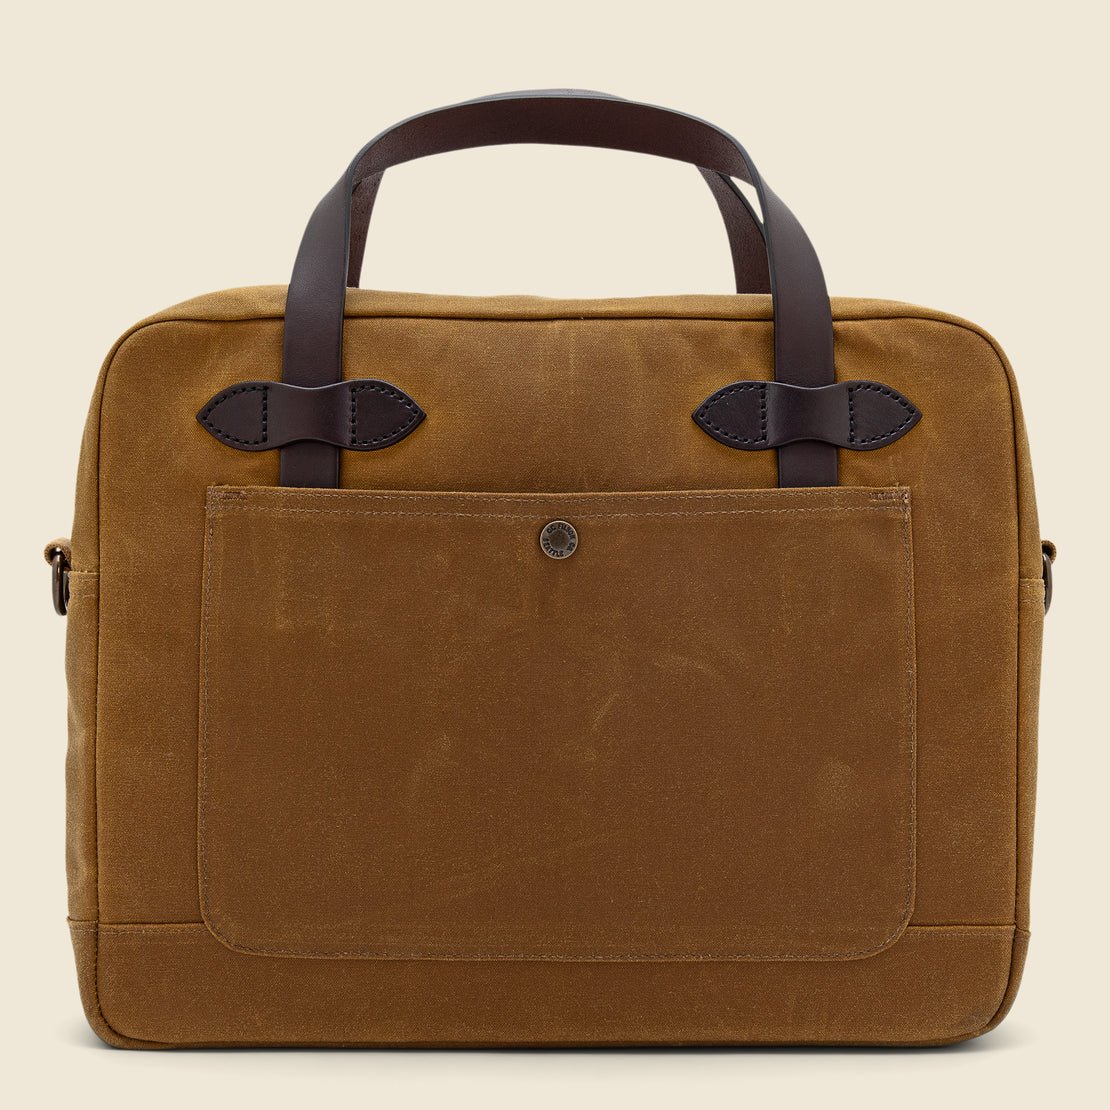 Tin Cloth Compact Briefcase - Dark Tan - Filson - STAG Provisions - Accessories - Bags / Luggage